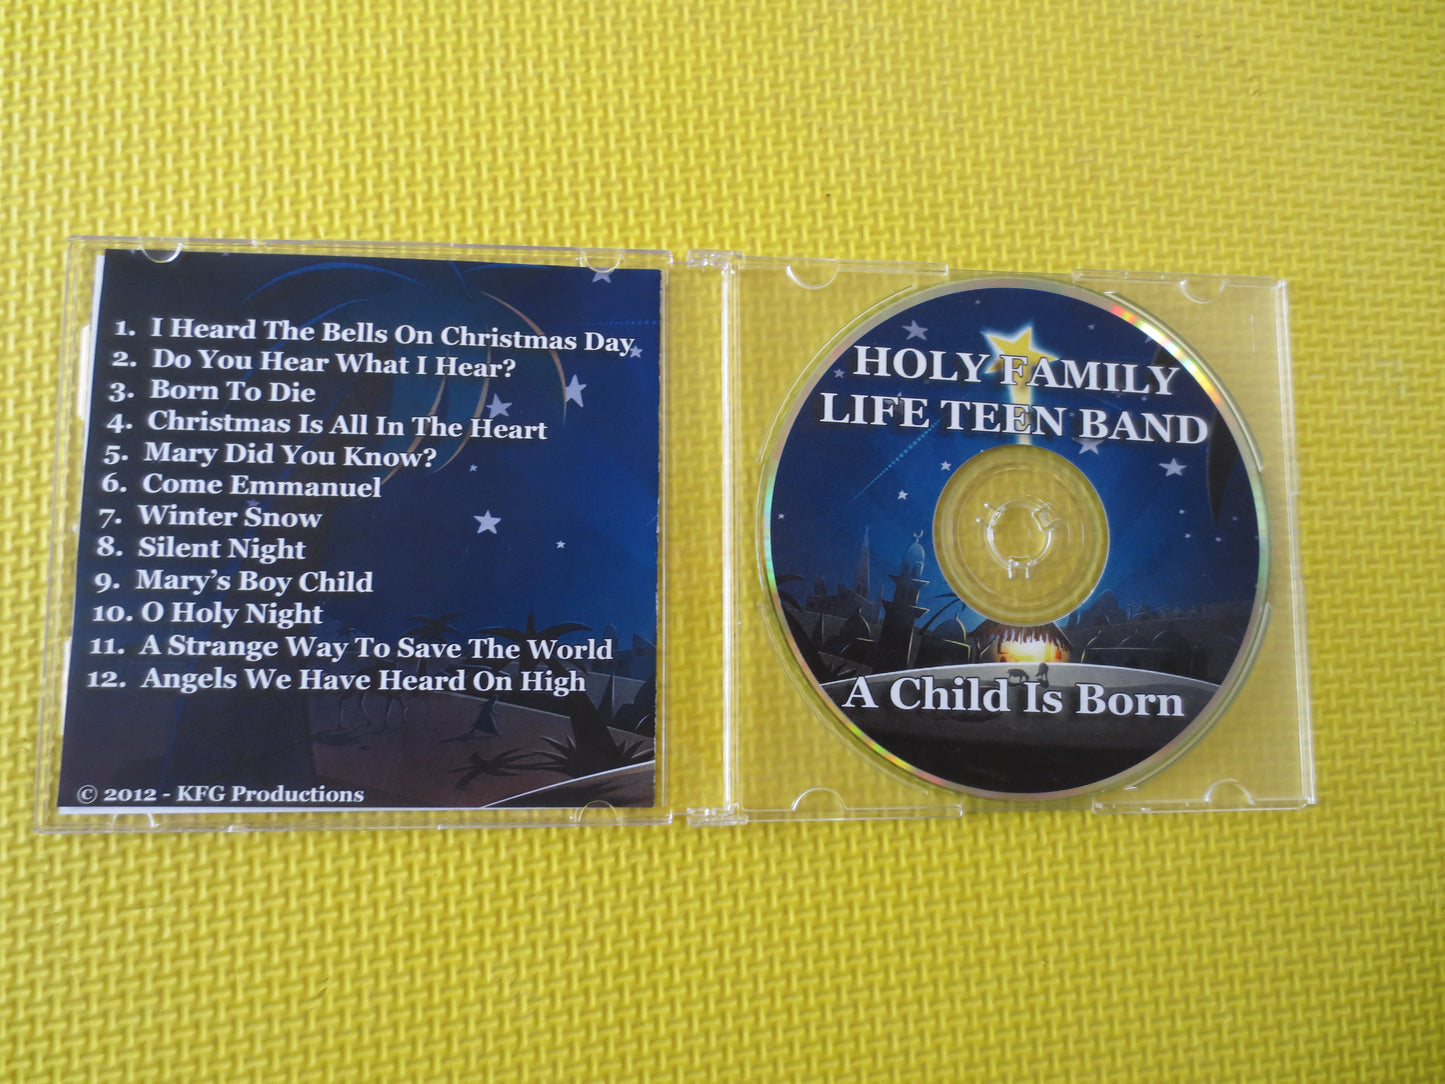 HOLY FAMILY, Life Teen Band, CHRISTMAS Music, Christmas Tunes, Christmas Songs, Christmas Hymns, Music Cds, cds, Compact Discs